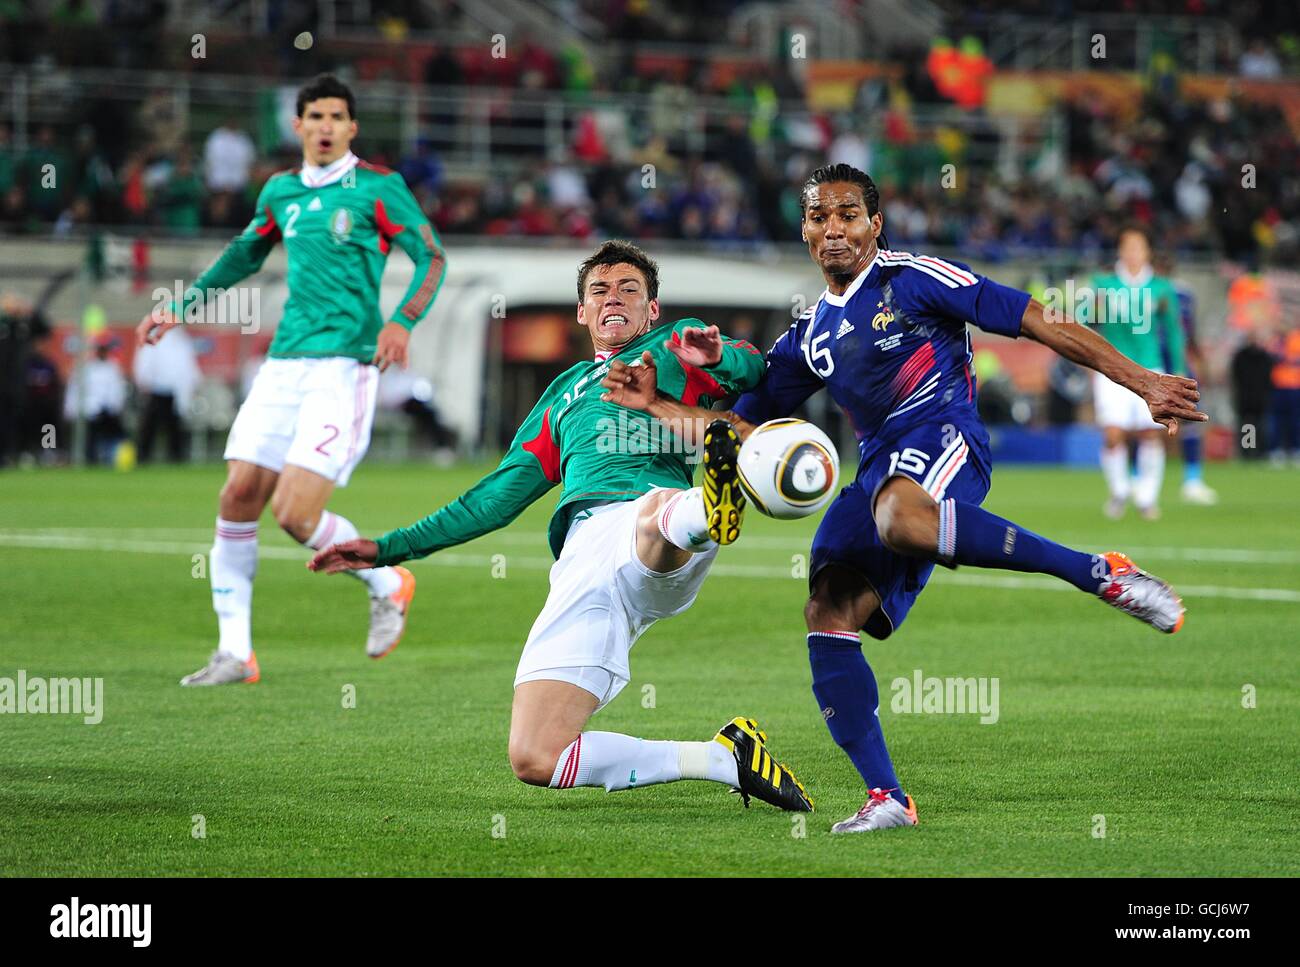 France's Florent Malouda (right) and Mexico's Hector Moreno, (left) battle for the ball. Stock Photo